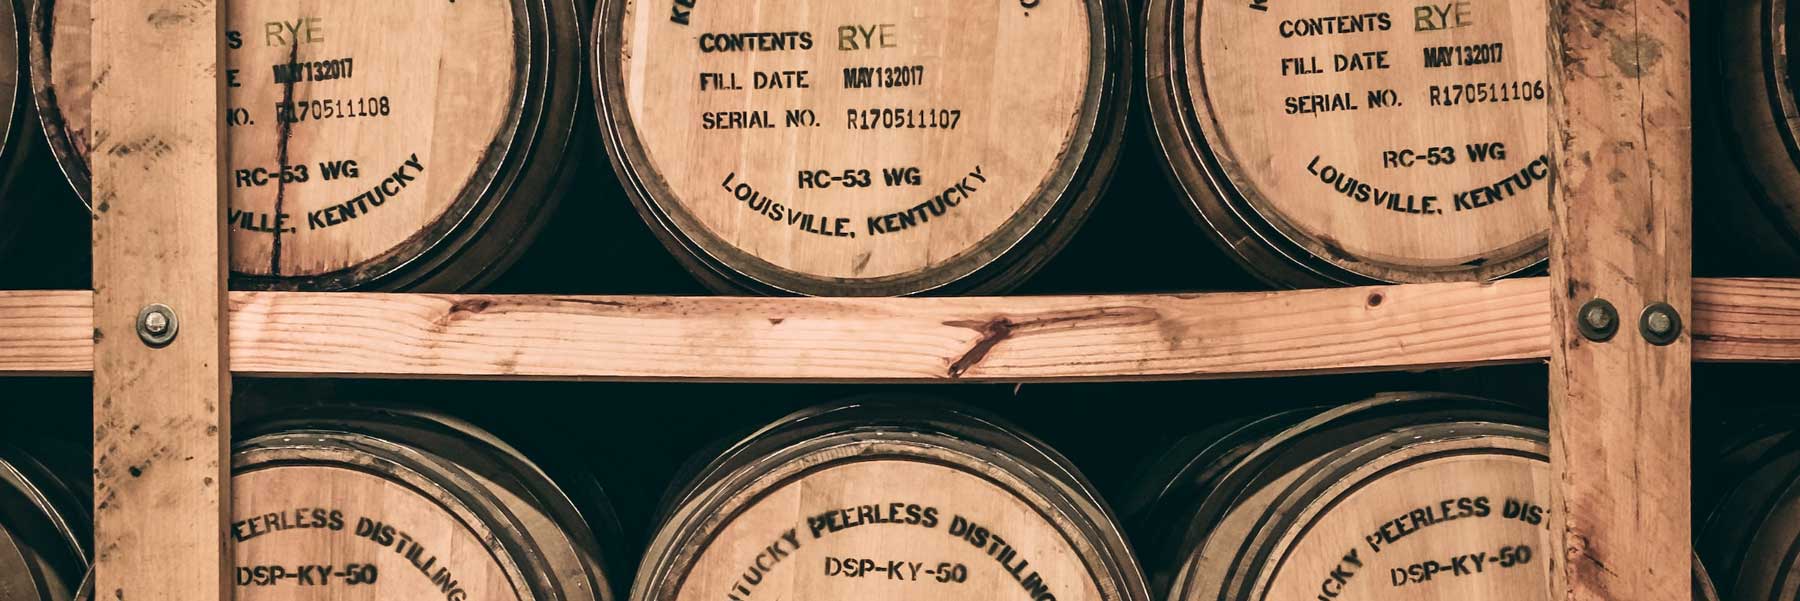 Single Barrel vs Double Barrel. What’s the difference? 